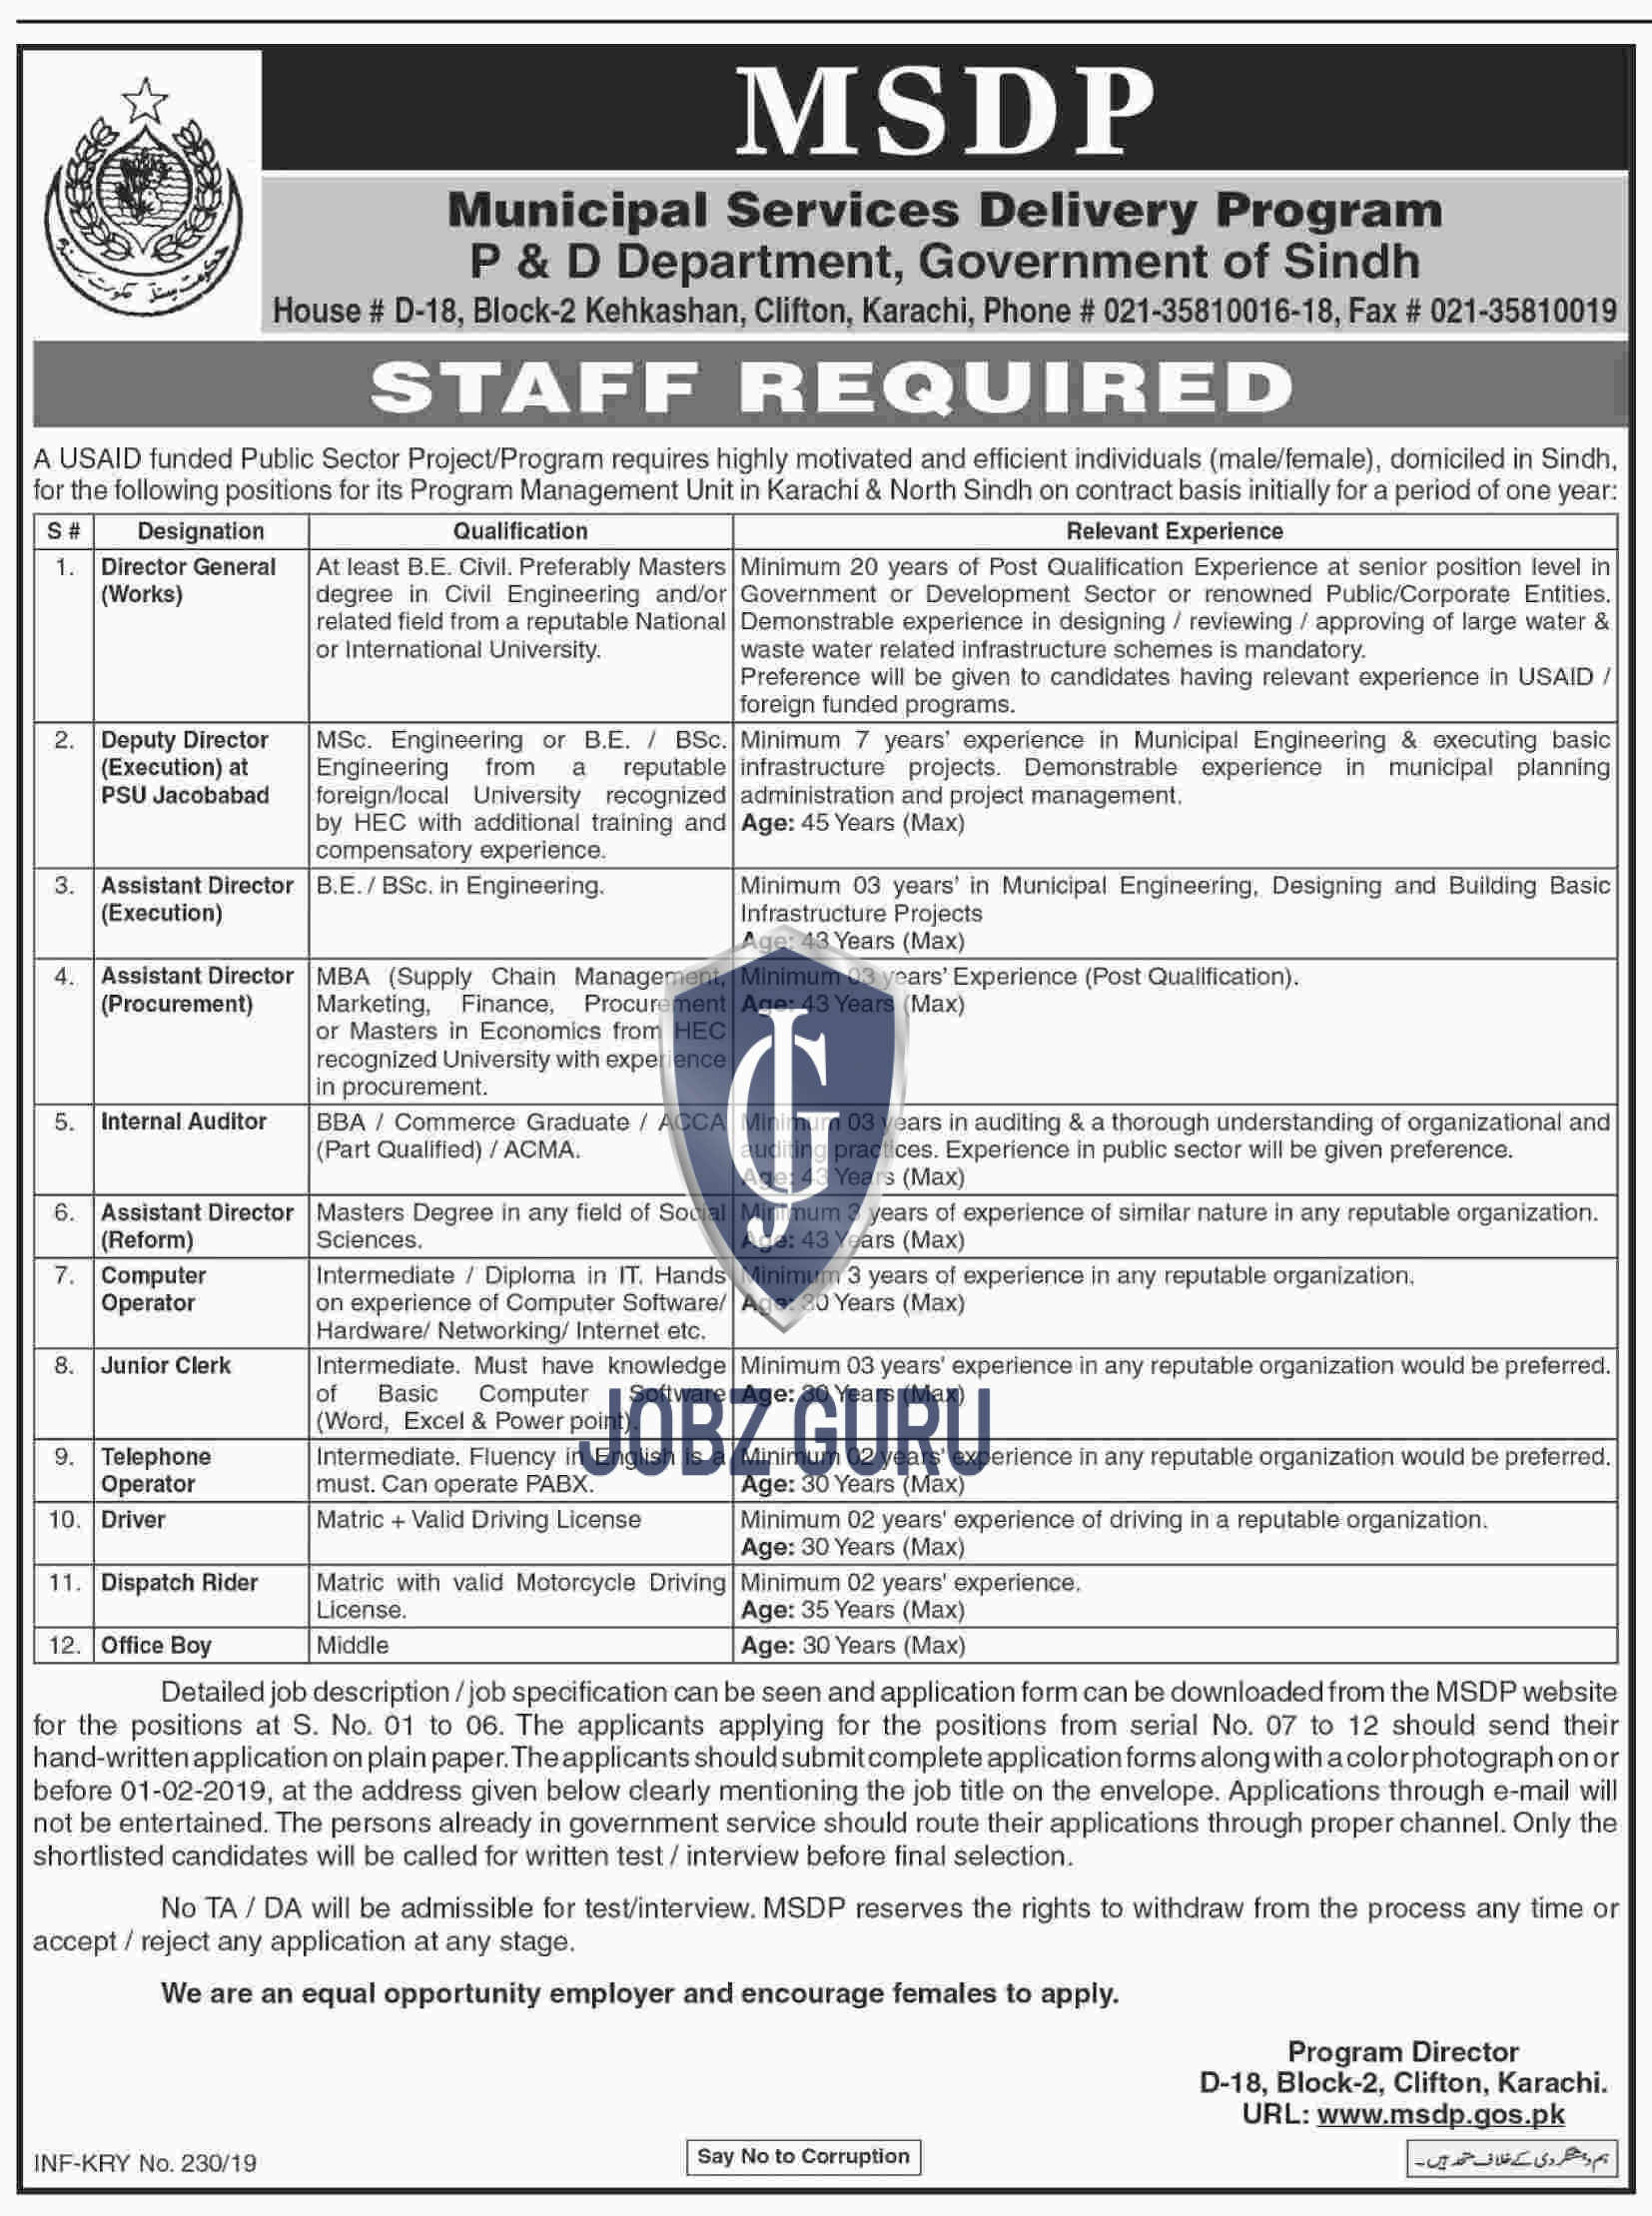 Municipal Services delivery Program Jobs 2019 Government of Pakistan Download application form MSDP-thumbnail